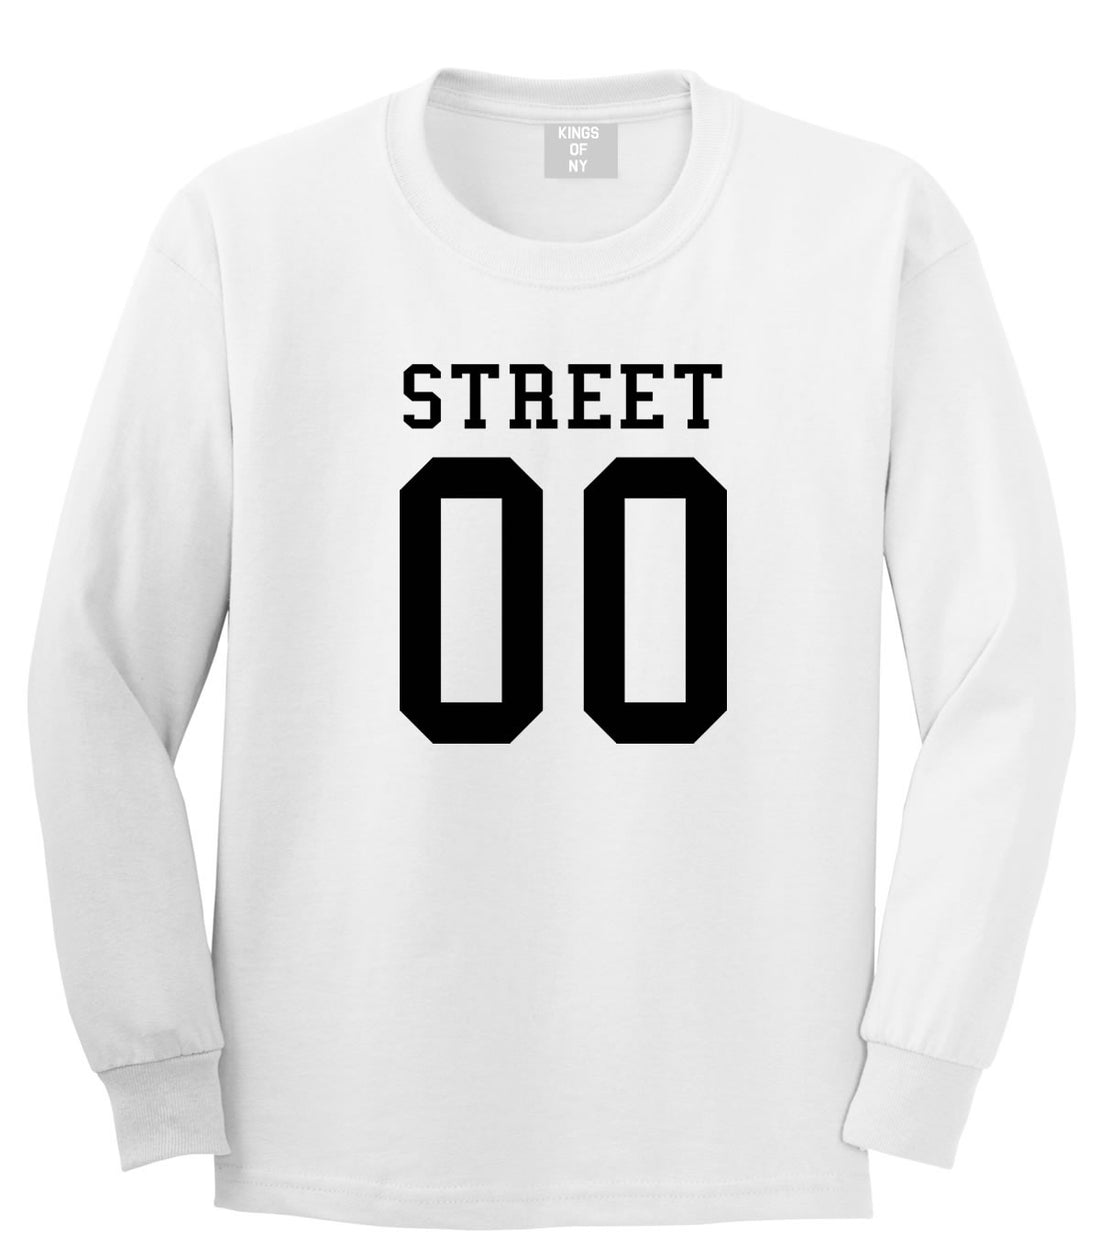 Street Team 00 Jersey Long Sleeve T-Shirt in White By Kings Of NY